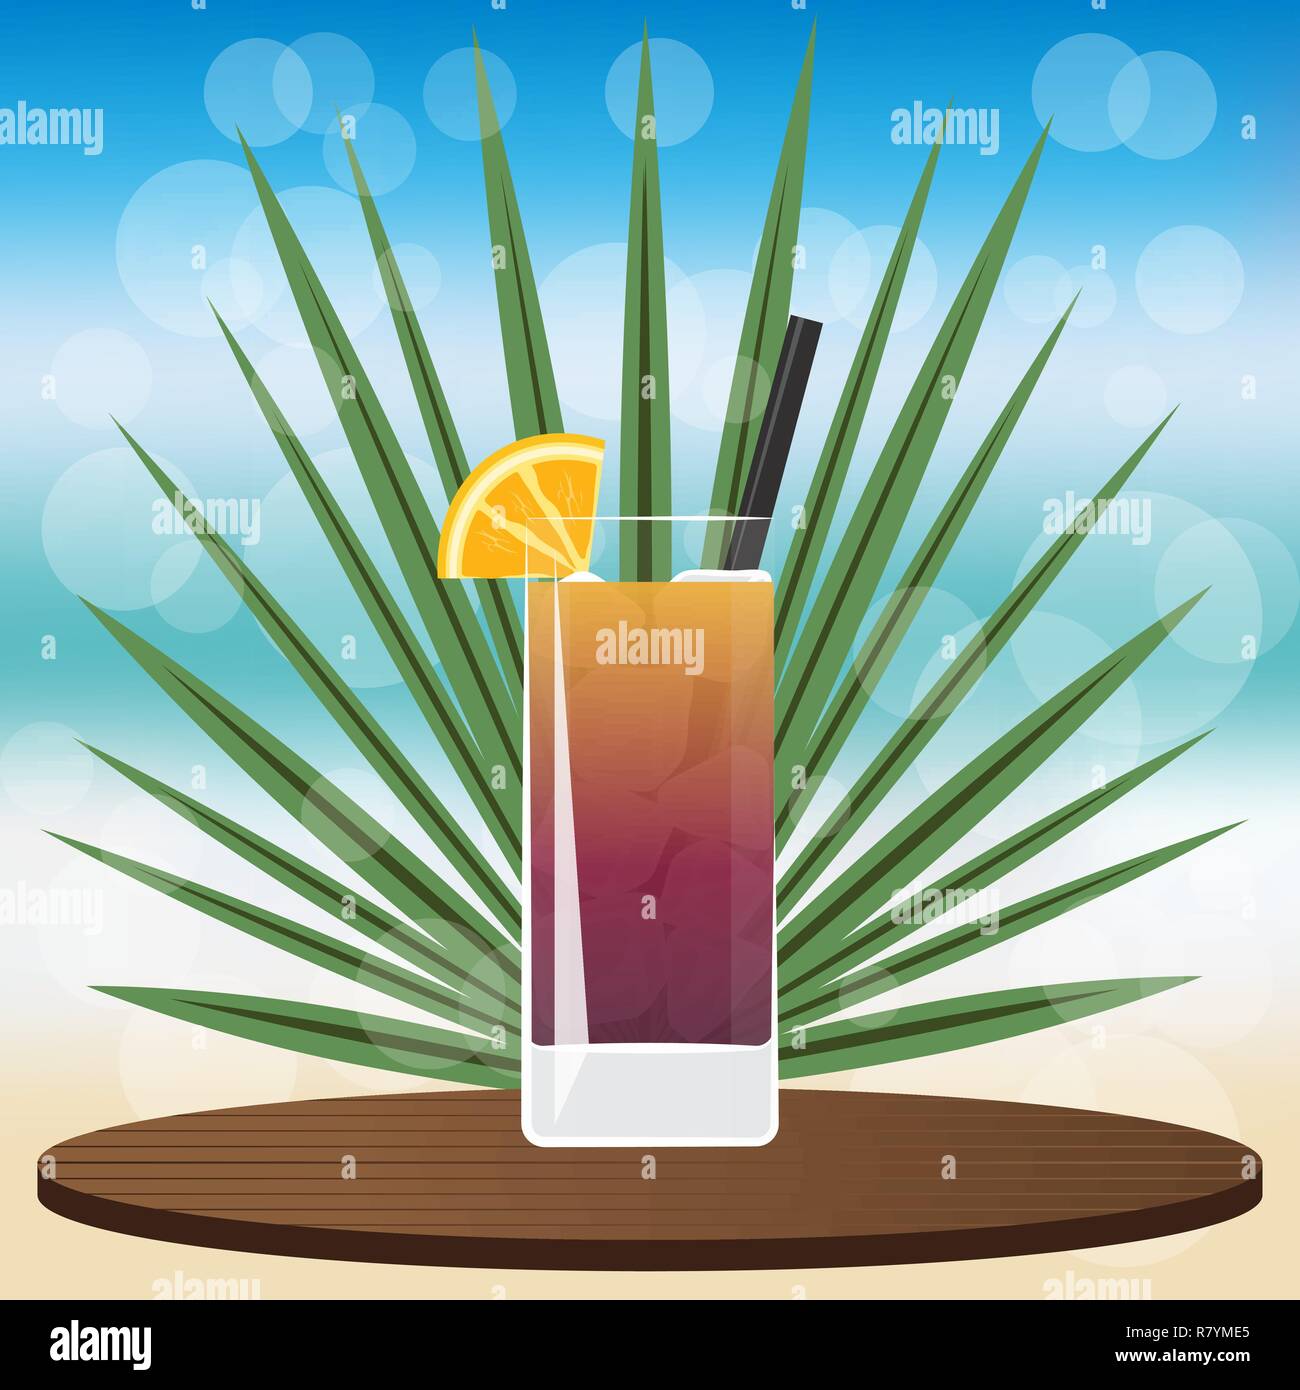 https://c8.alamy.com/comp/R7YME5/long-island-iced-tea-cocktail-on-wooden-classic-tray-on-blurred-background-with-bokeh-vector-illustration-for-web-and-print-invitation-and-menus-f-R7YME5.jpg